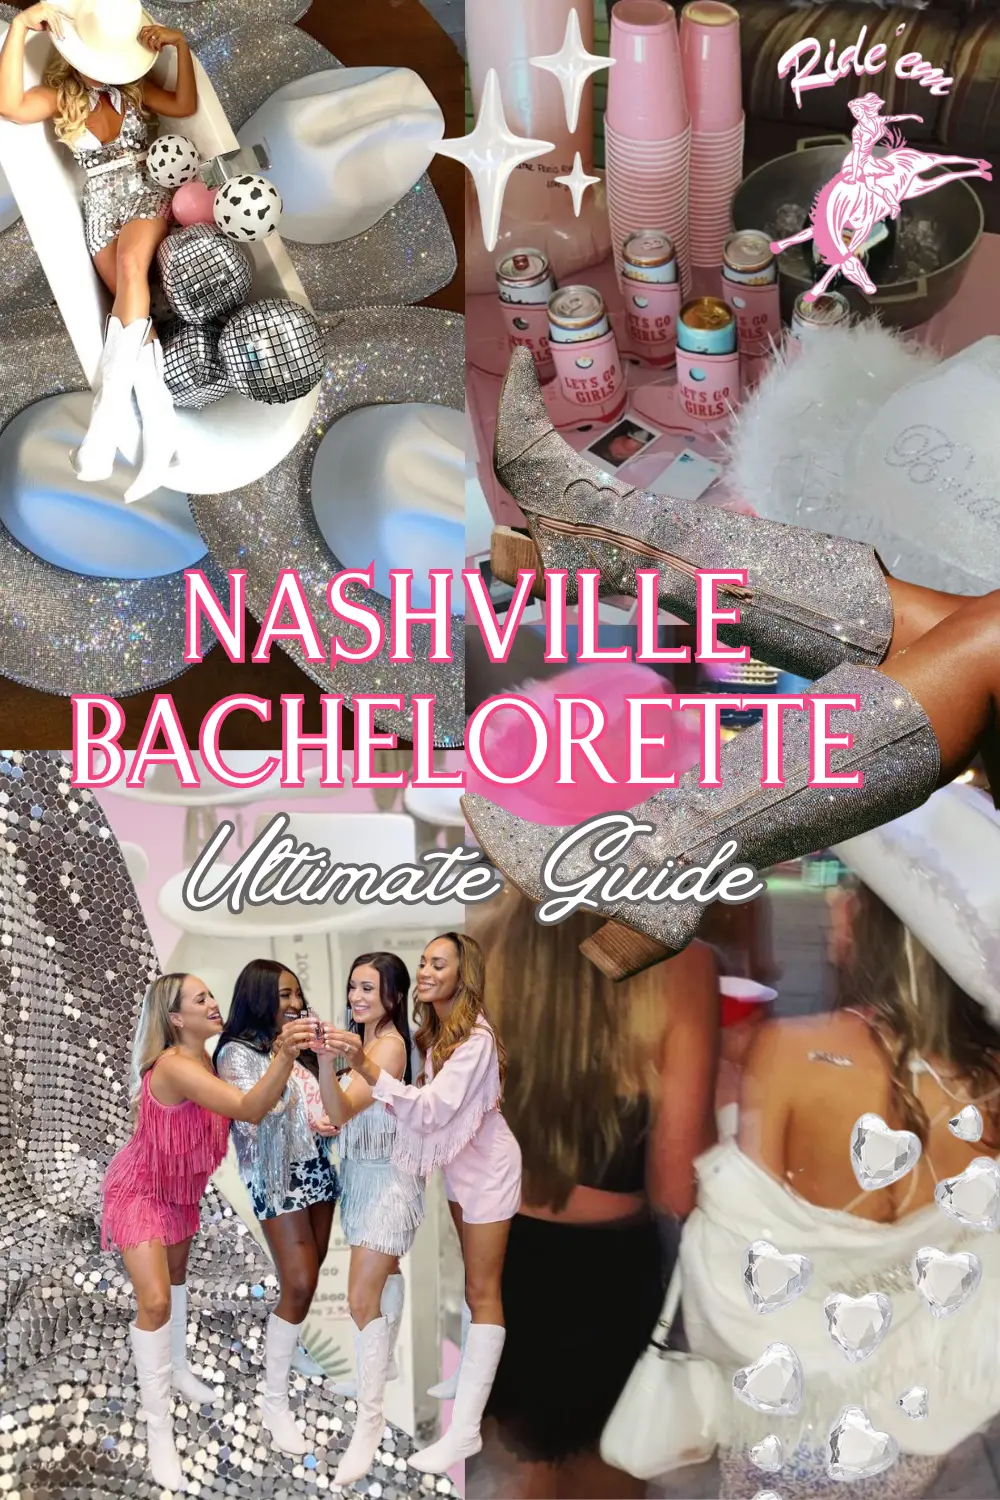 A collage of photos with the words nashville bachelorette ultimate guide.